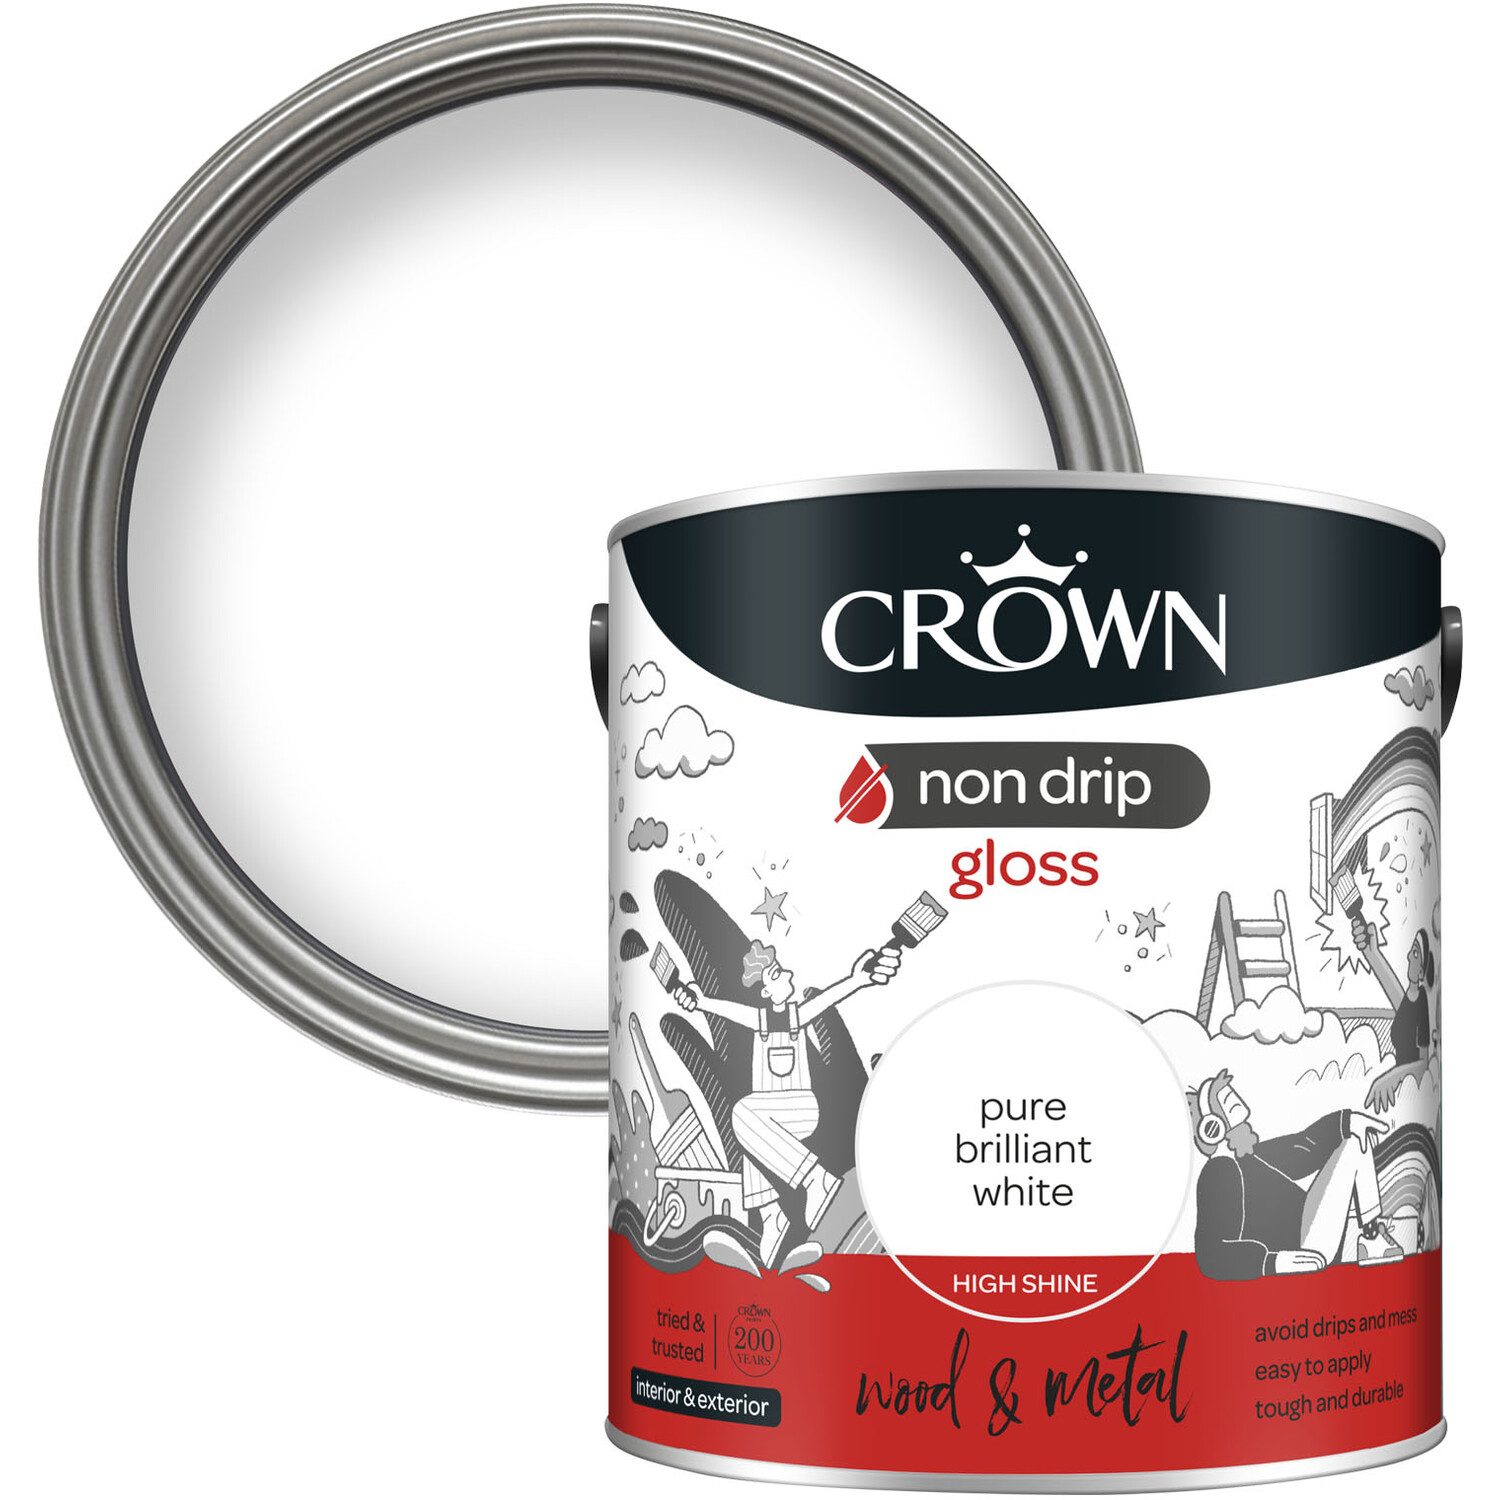 Crown Non Drip Gloss Wood and Metal Paint - Pure Brilliant White Image 1